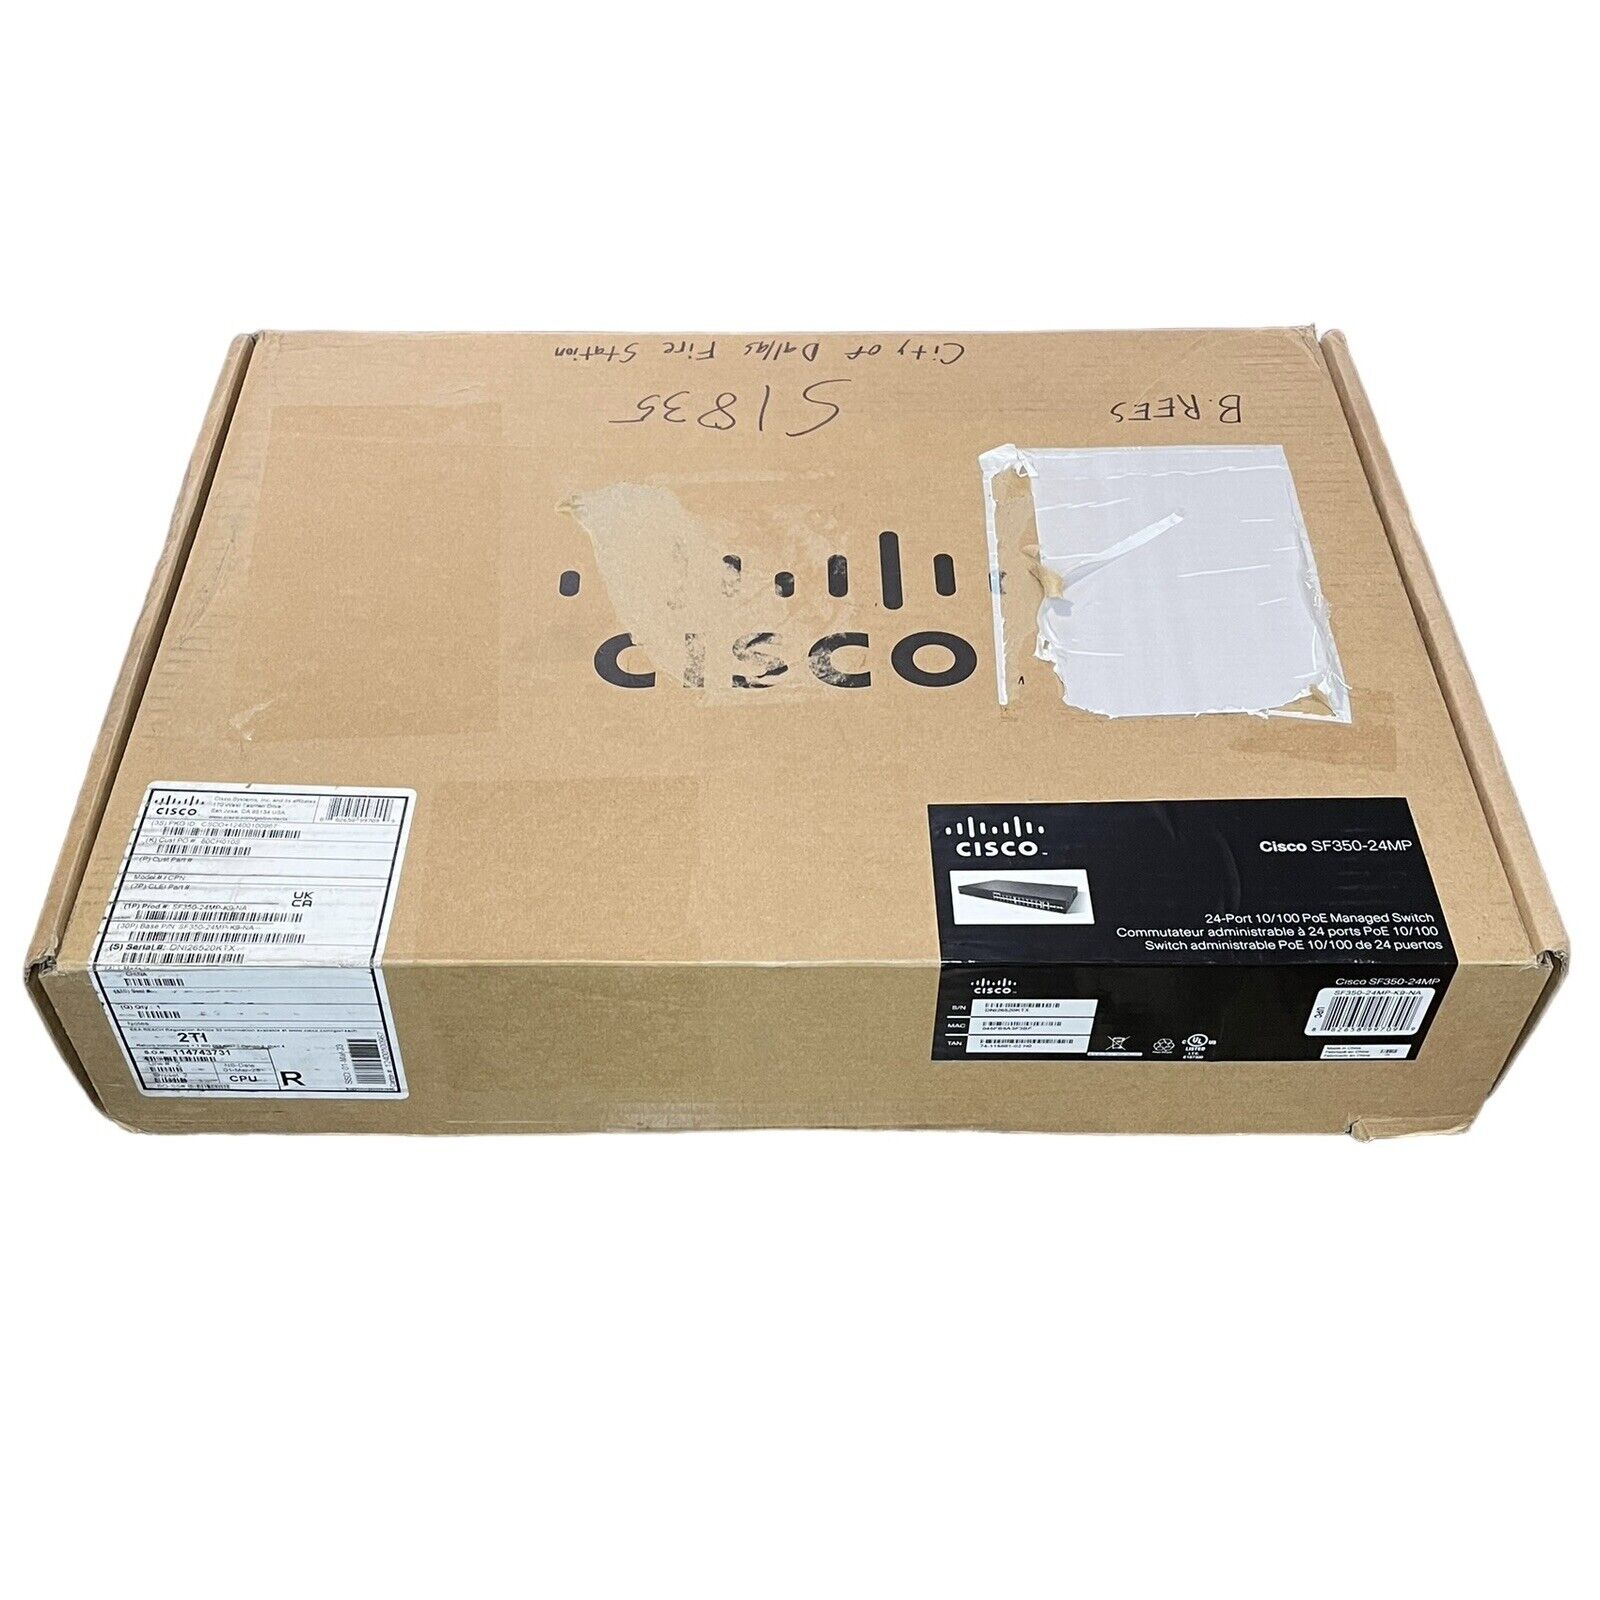 Cisco SF350-24MP 24-Port 10/100 PoE Managed Switch - New open box